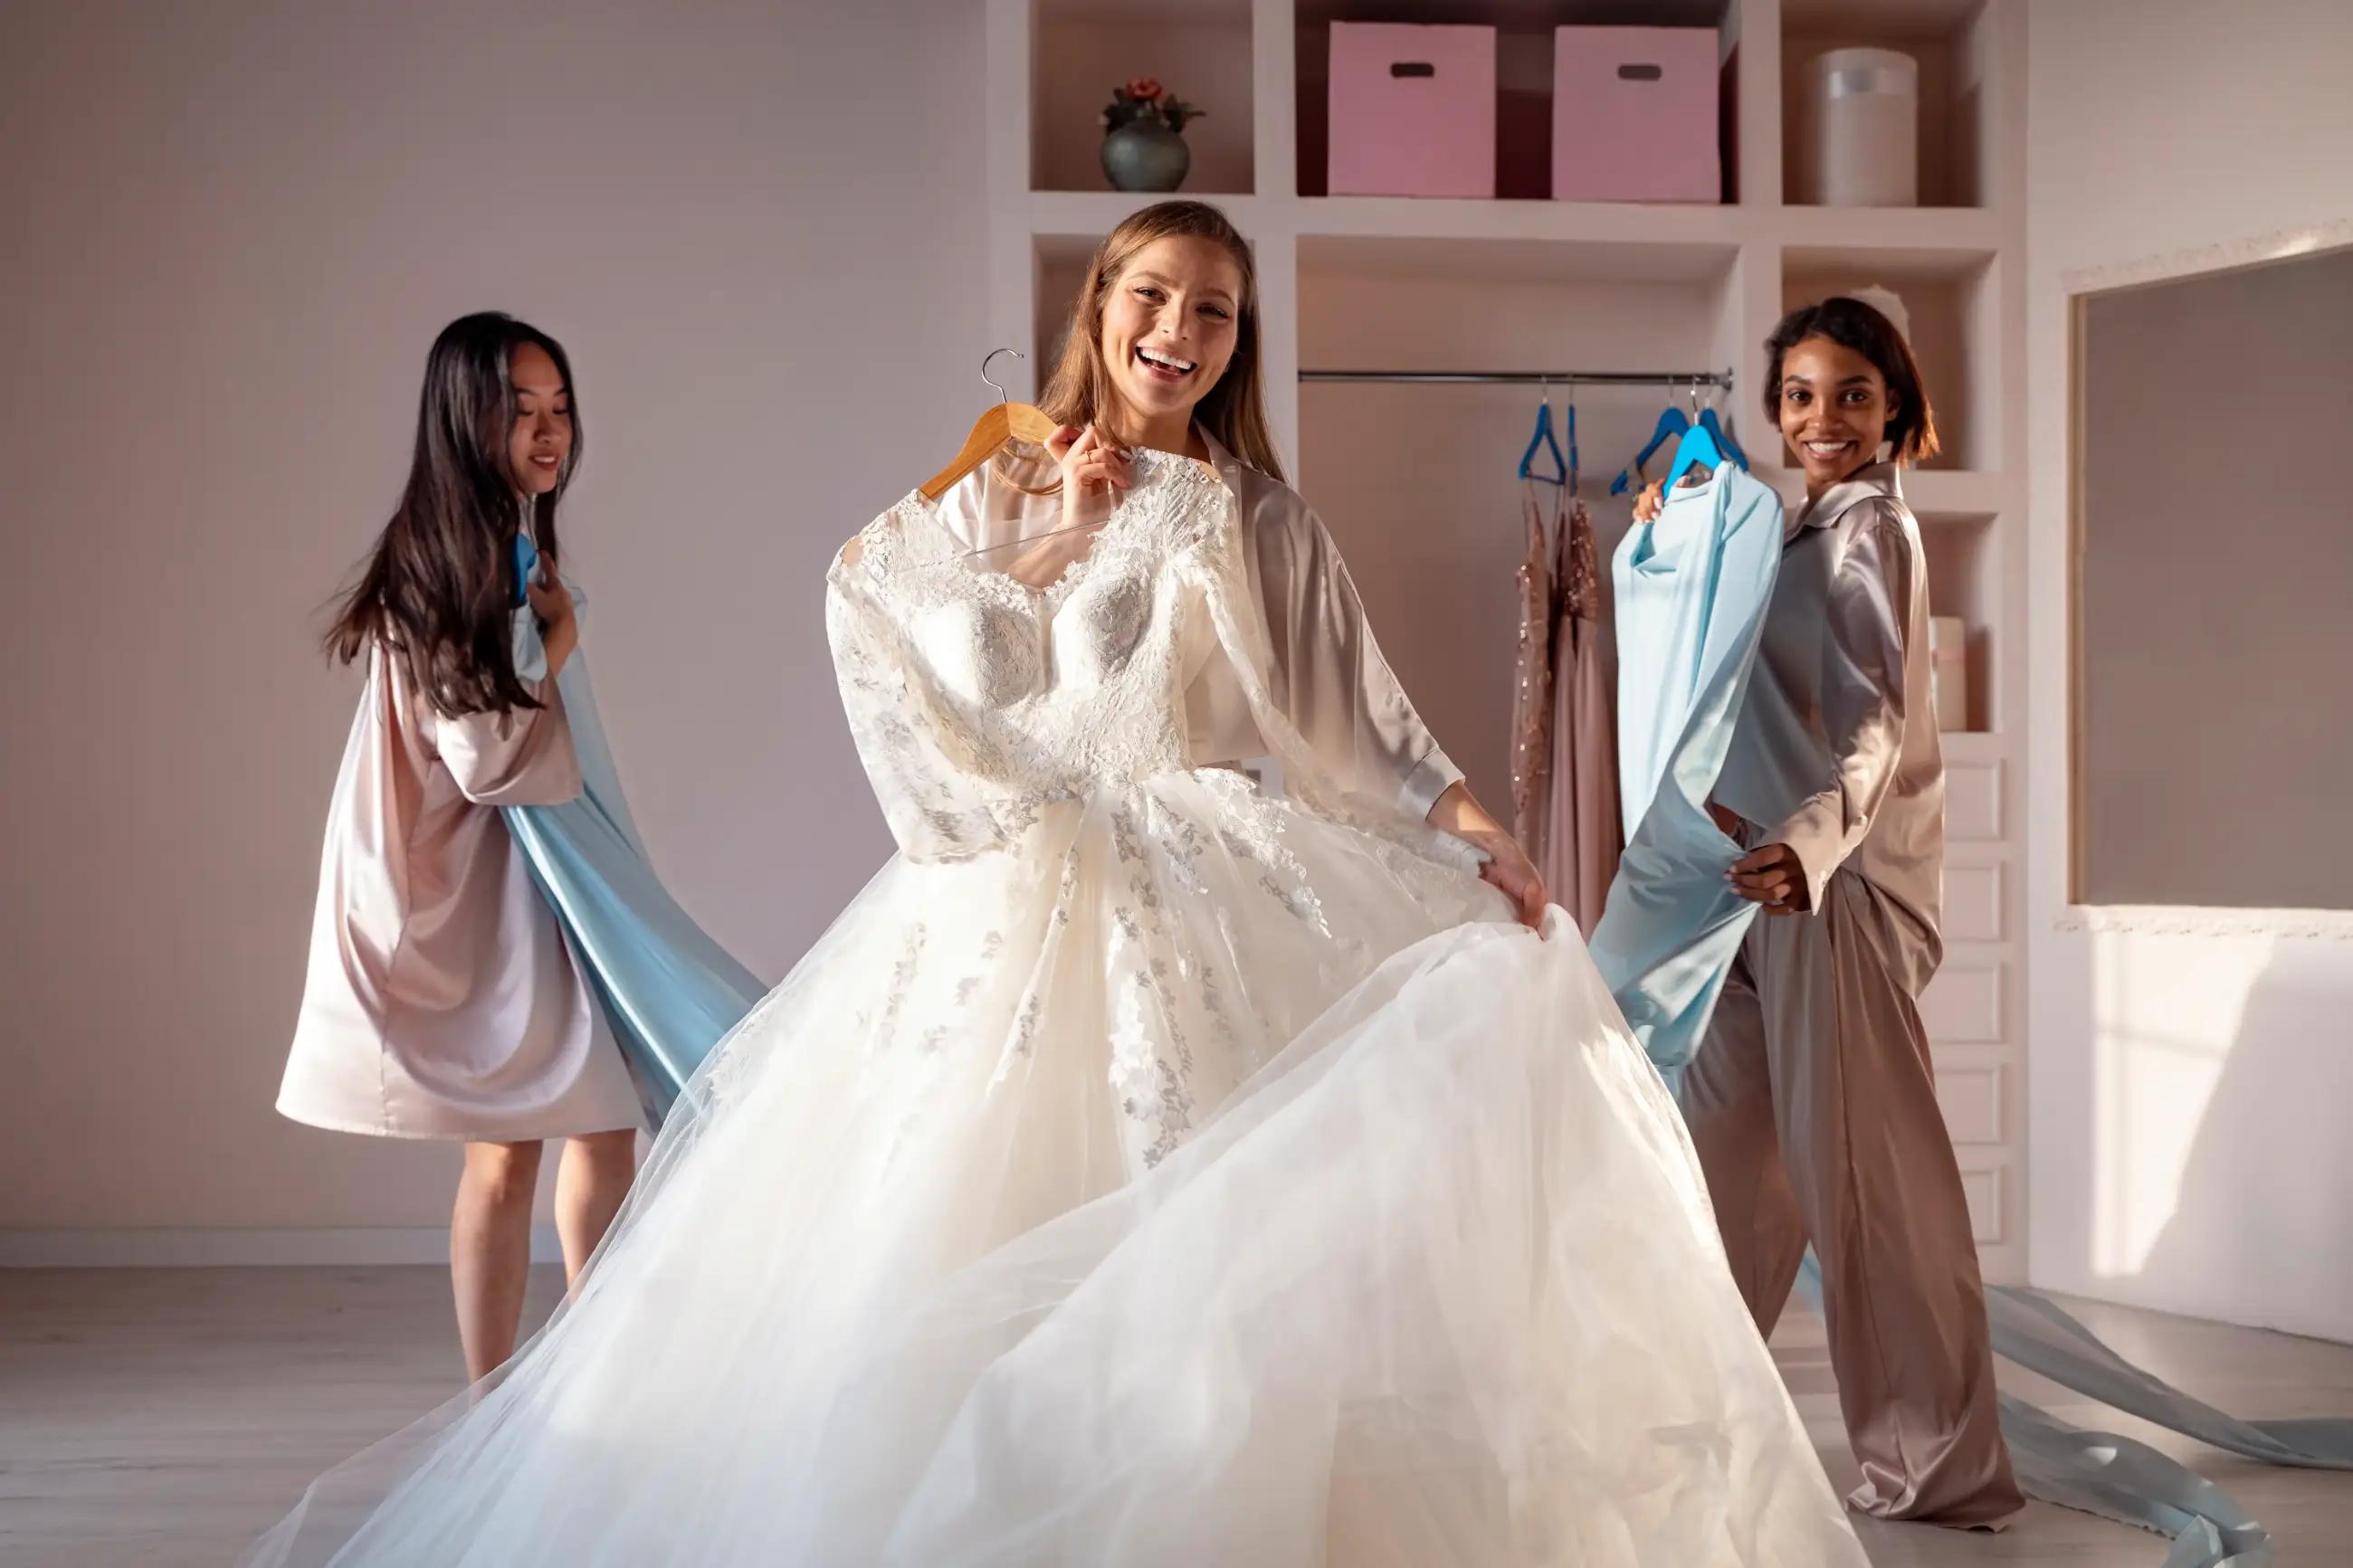 Sleeping On Your Wedding Dress Decision - Is this a Good or Bad Idea? Image